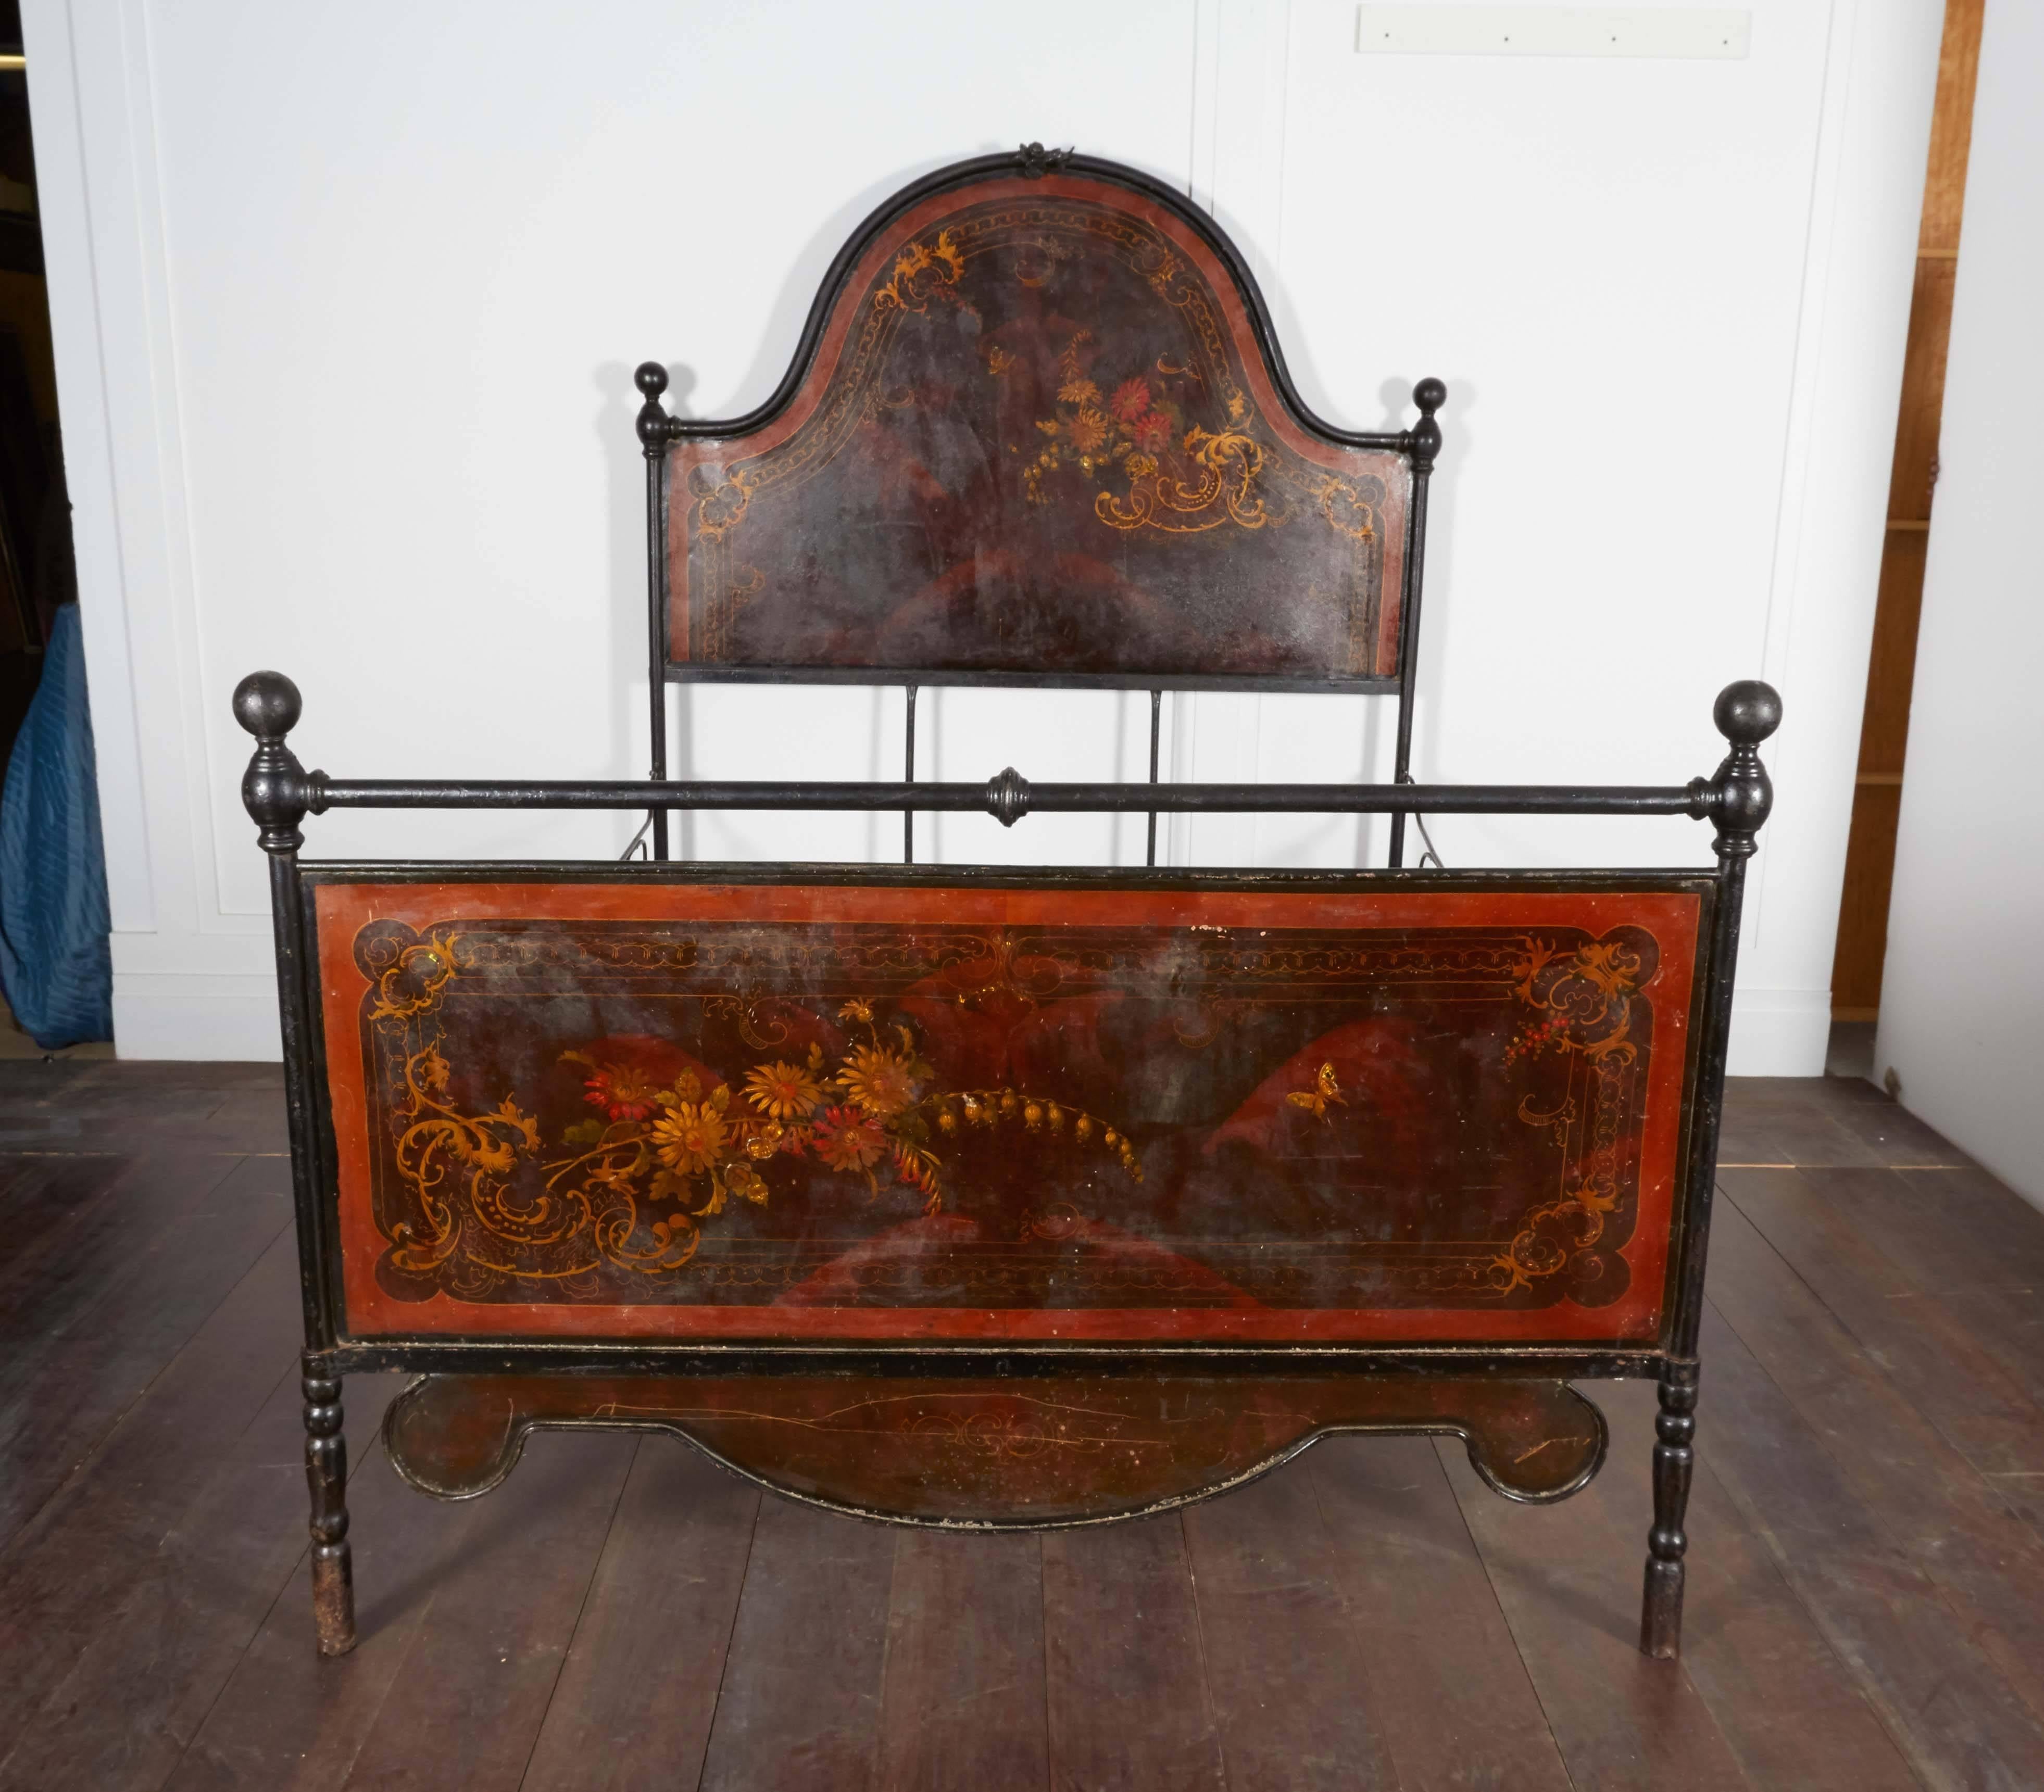 Queen-size Campaign iron bed with hand-painted headboard and foot board.

Not available for sale or to ship in the state of California.